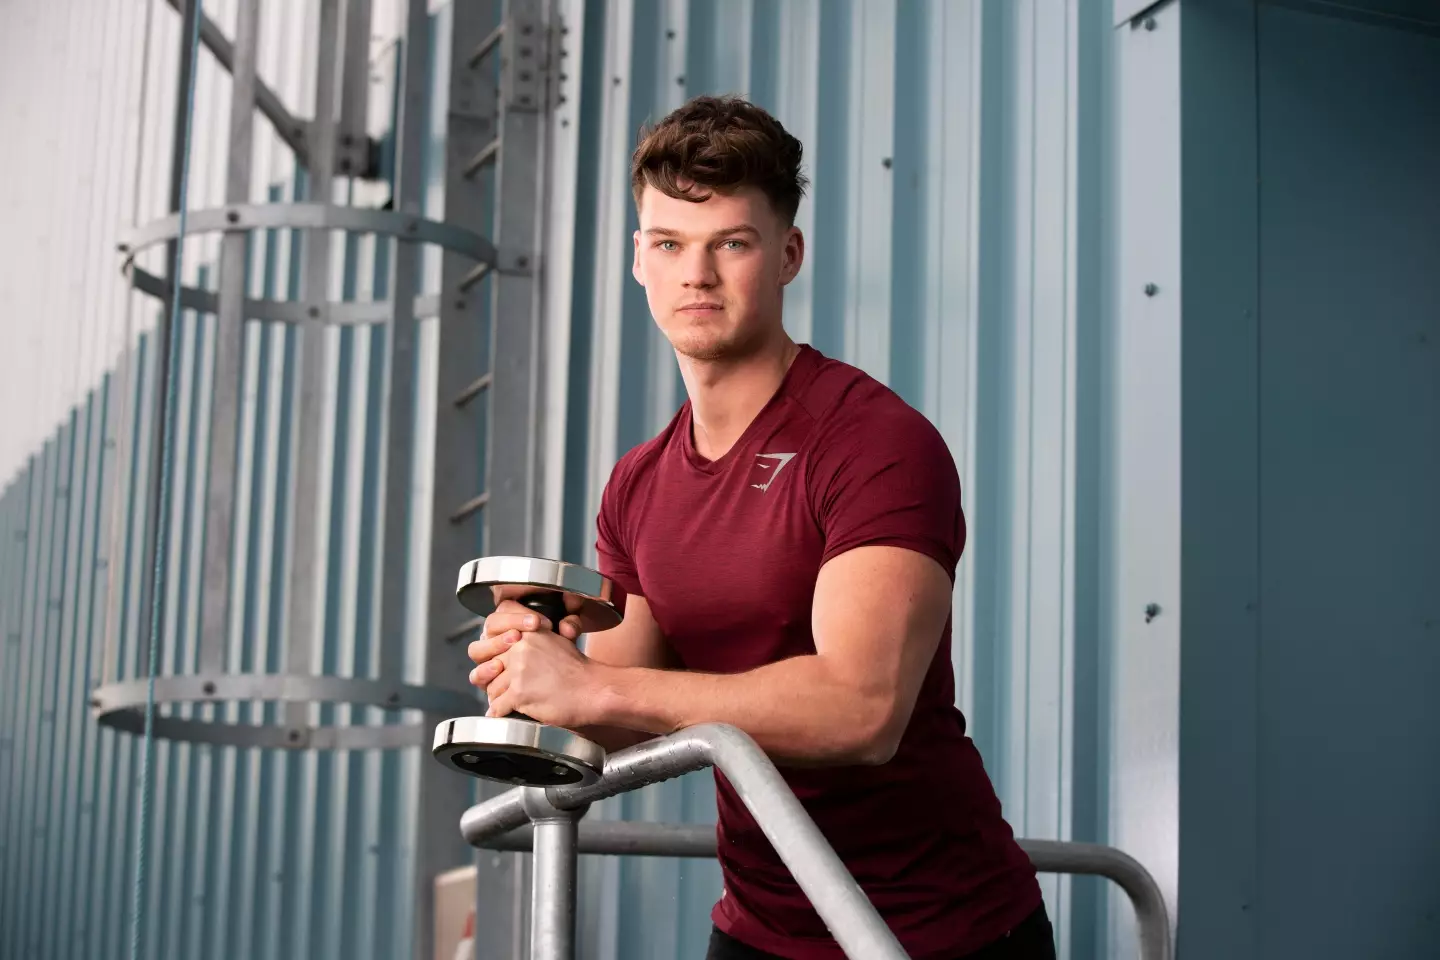 Gymshark Owner Ben Francis has had quite the rise to where he is now.